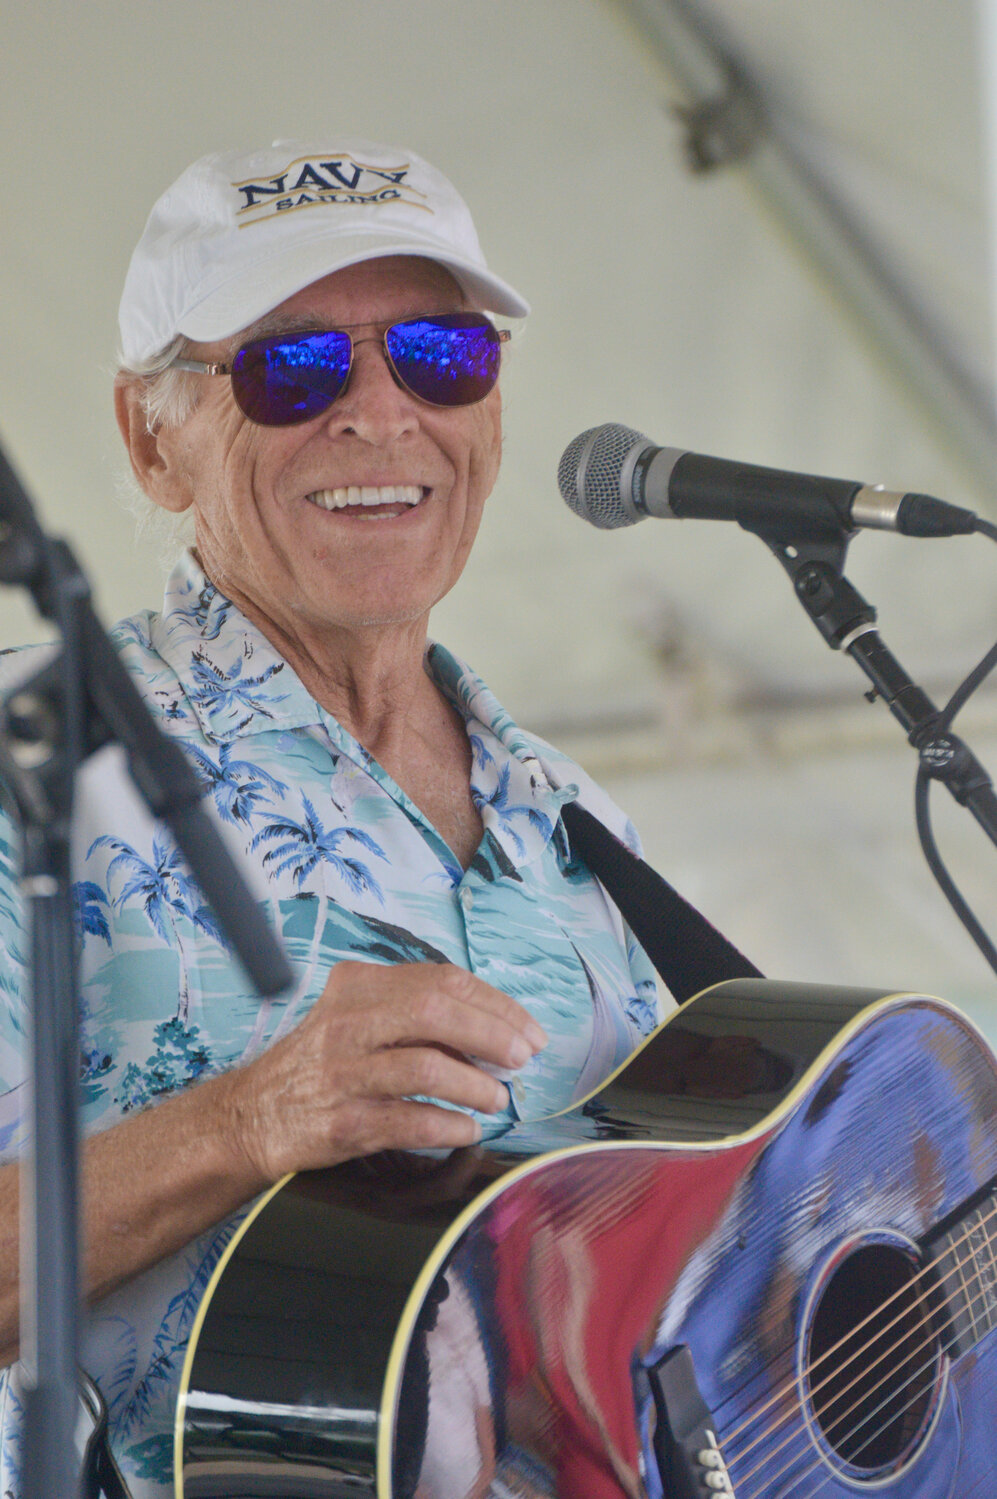 Jimmy Buffett laughs between numbers during his surprise set at Sunset Cove on Park Avenue on Sunday. The show was billed as a concert featuring his Coral Reefer Band mate, guitarist Mac McAnally, but Buffett snuck onto the stage just three songs in.